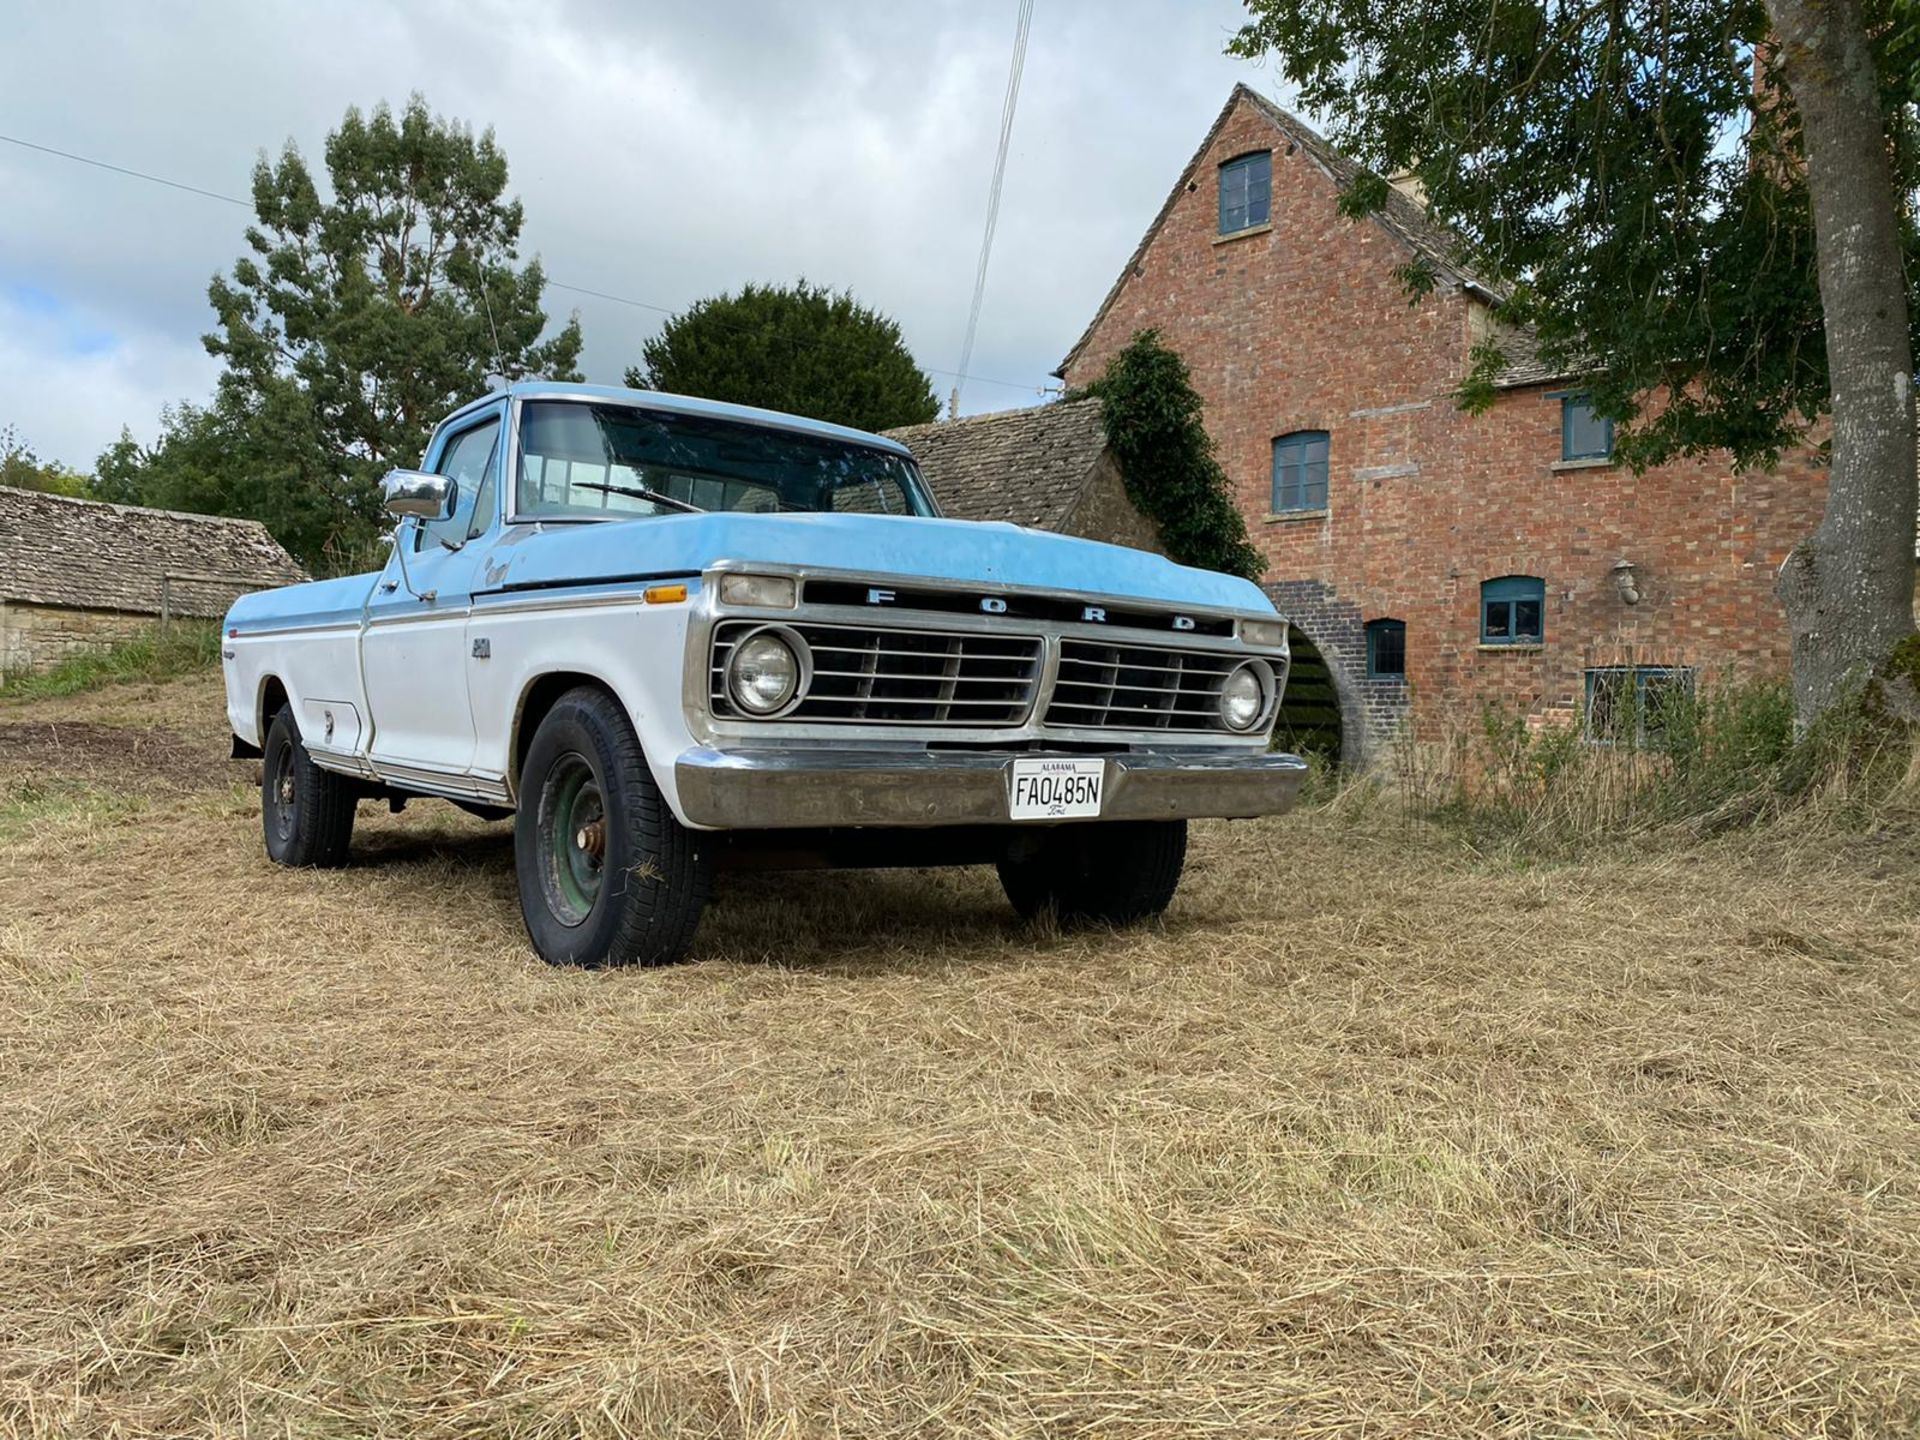 1975 FORD F-250 6.4 (390) V8, 4 SPEED MANUAL, HAS JUST BEEN REGISTERED, NEW BENCH SEAT *NO VAT* - Image 16 of 22